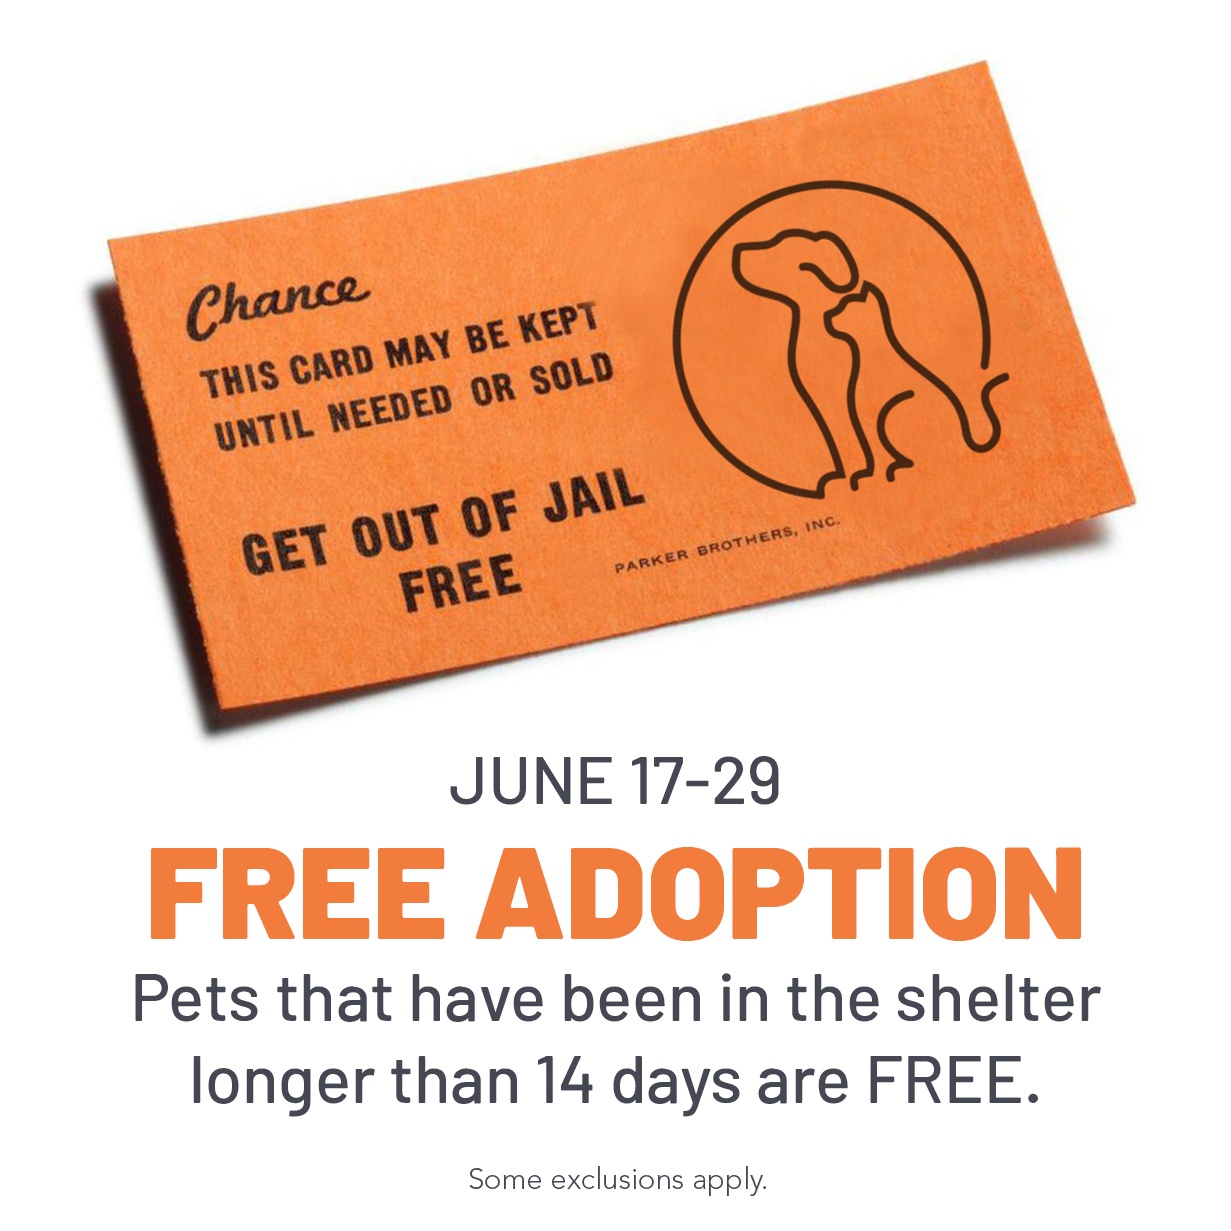 Get Out Of Jail Freeplaying Petnopoly At Animal Services - City - Get Out Of Jail Free Card Printable